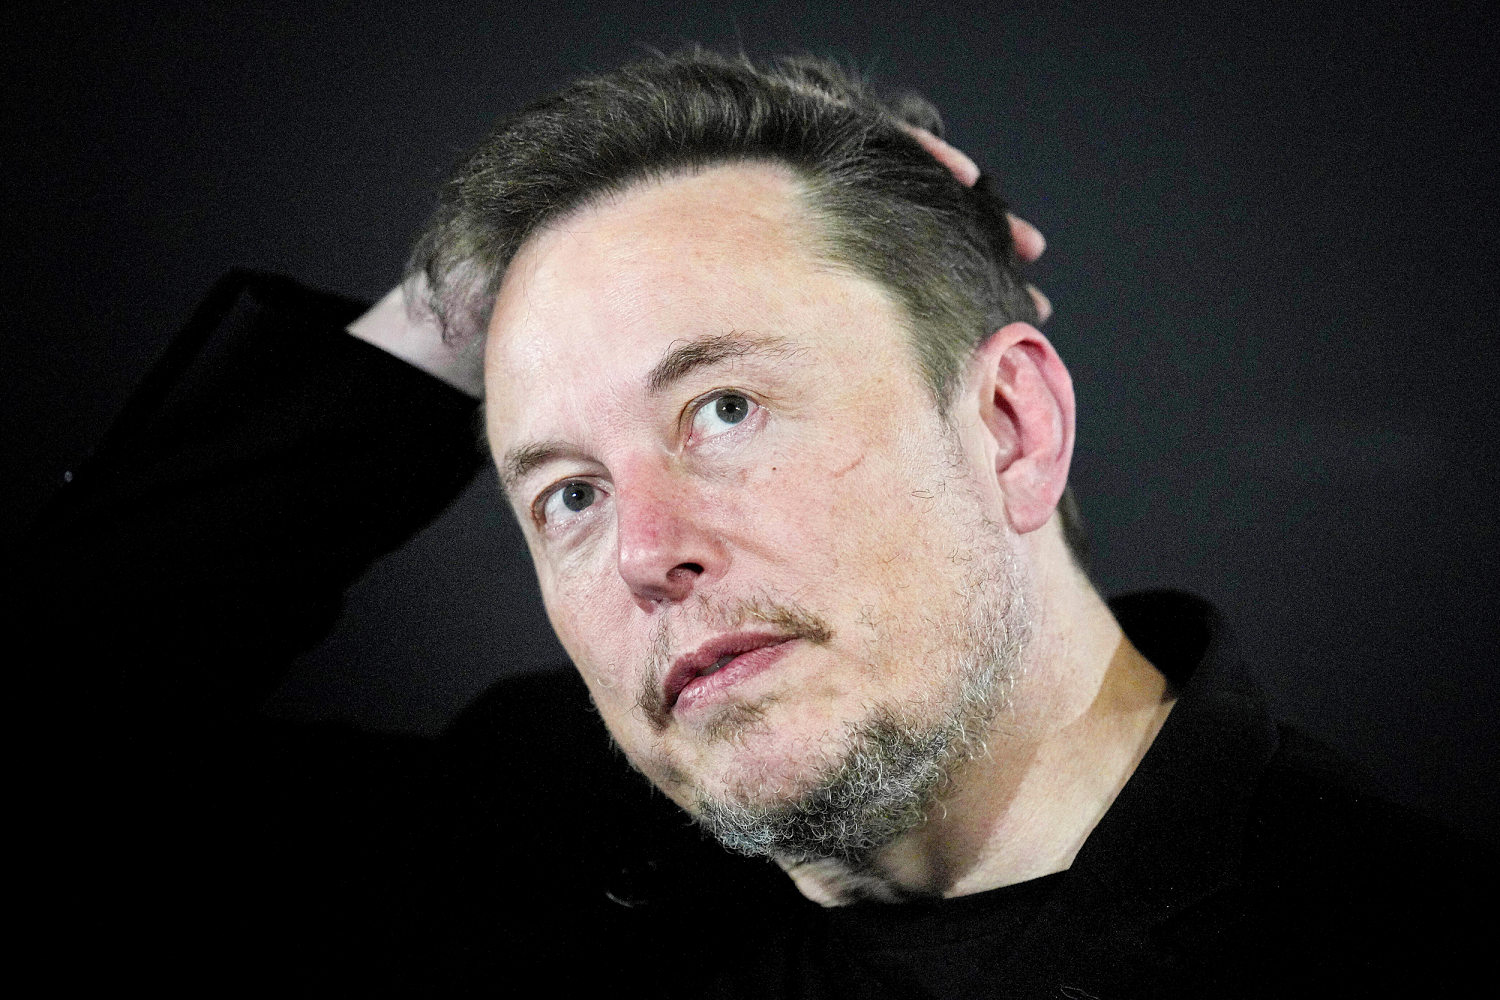 Last year, Elon Musk cursed at advertisers. Now he says he didn't mean it.